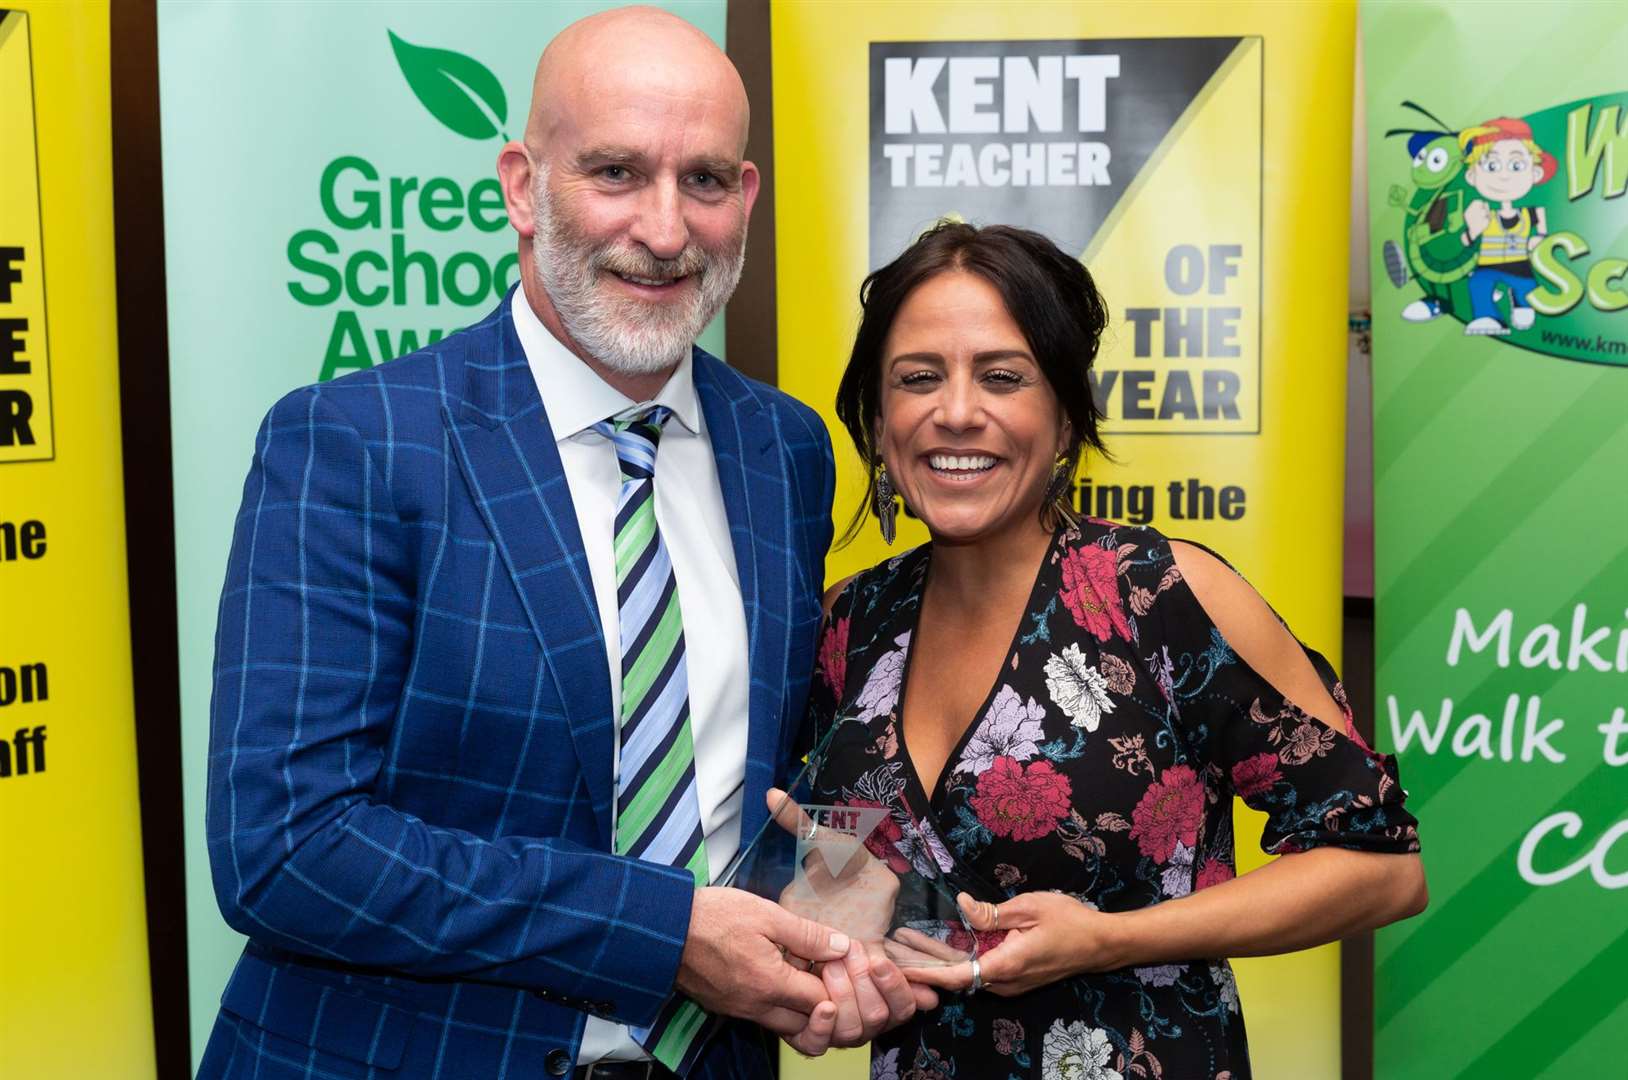 Overall Kent Secondary School Teacher of the Year, Fiona Ravate of the Rowans AP Academy. Presented by Tom Stanley of KCS Commercial Services. Picture: Countrywide Photographic